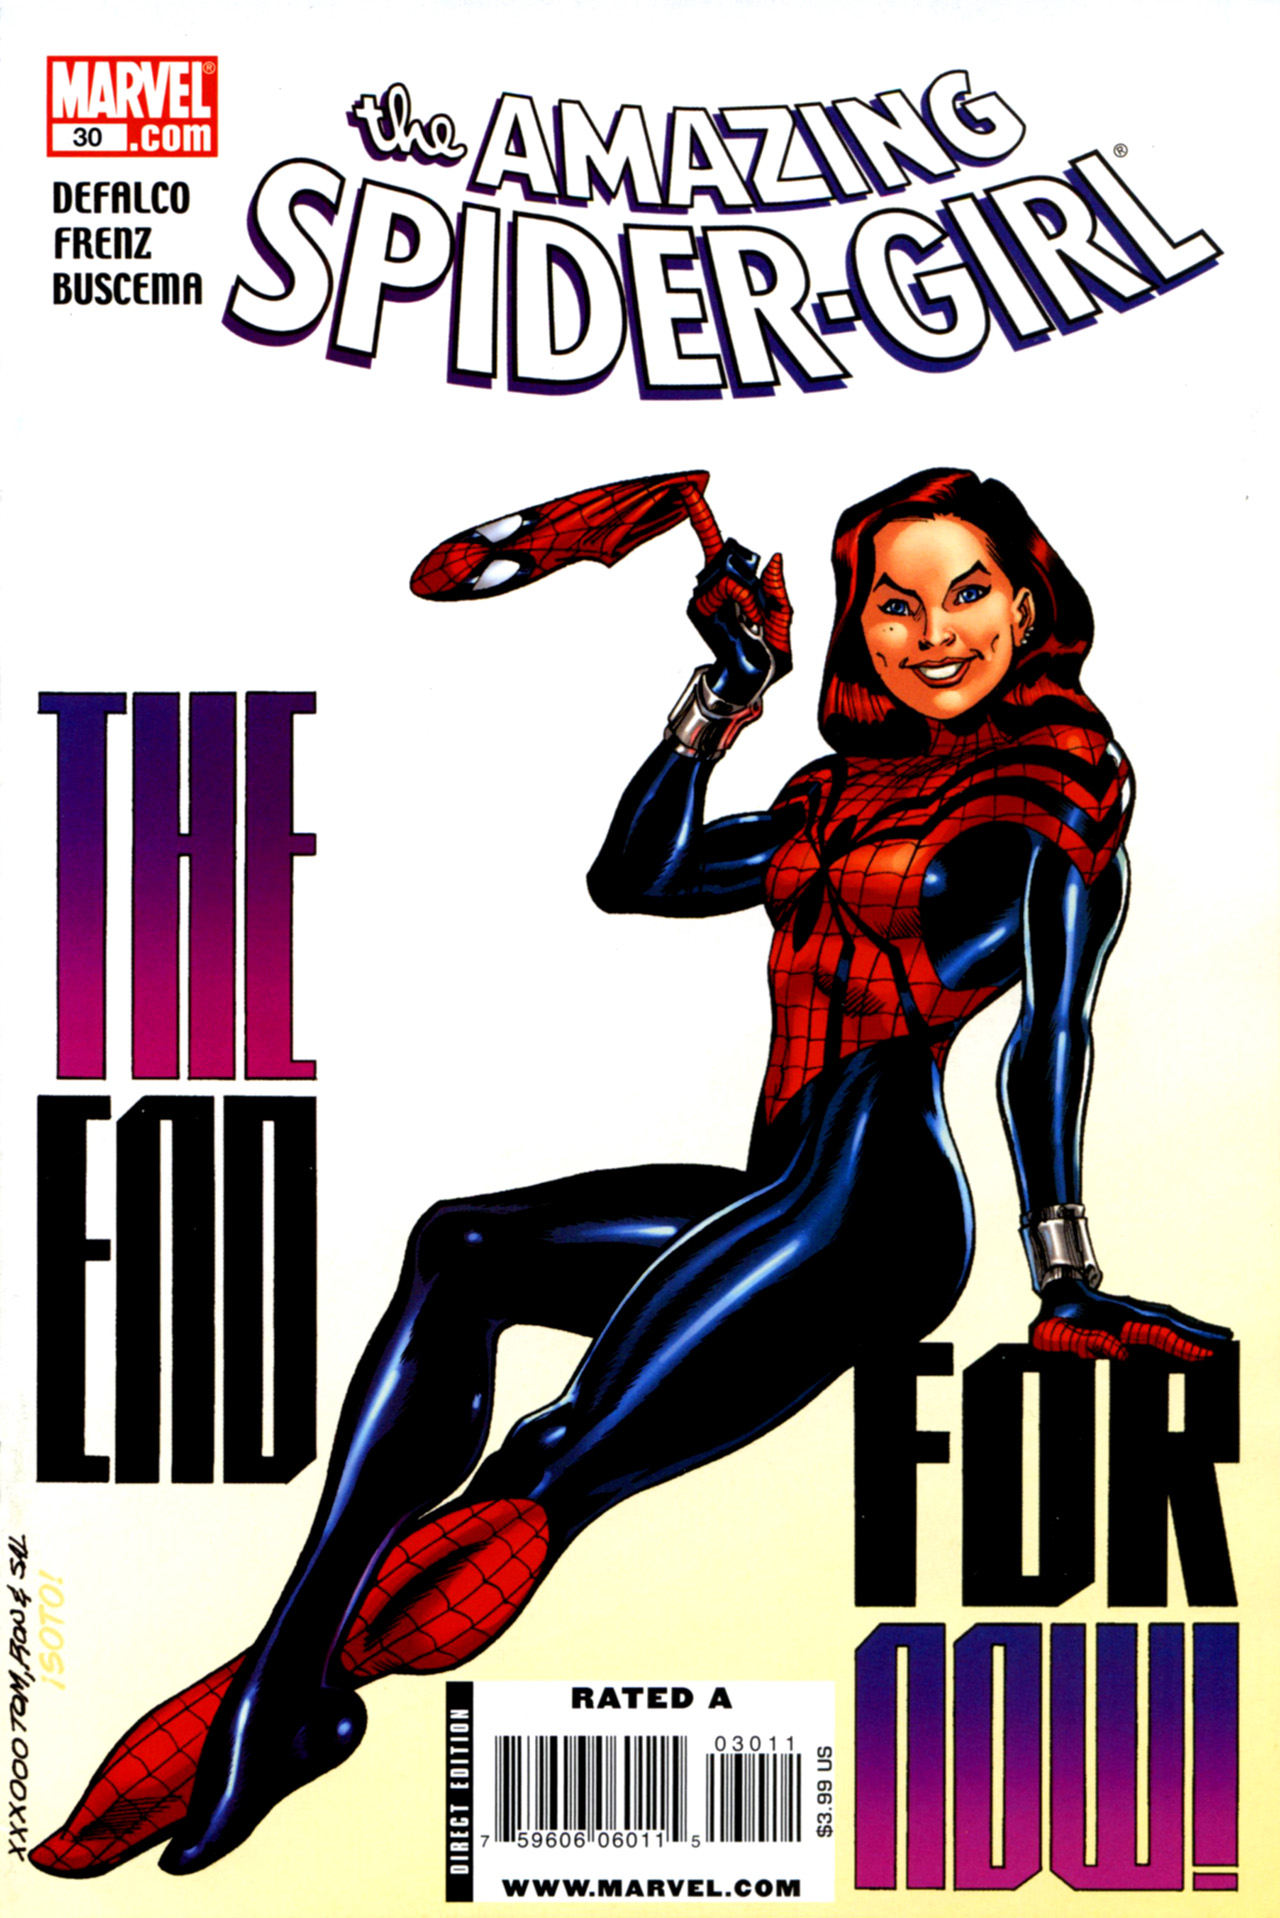 Read online Amazing Spider-Girl comic -  Issue #30 - 1